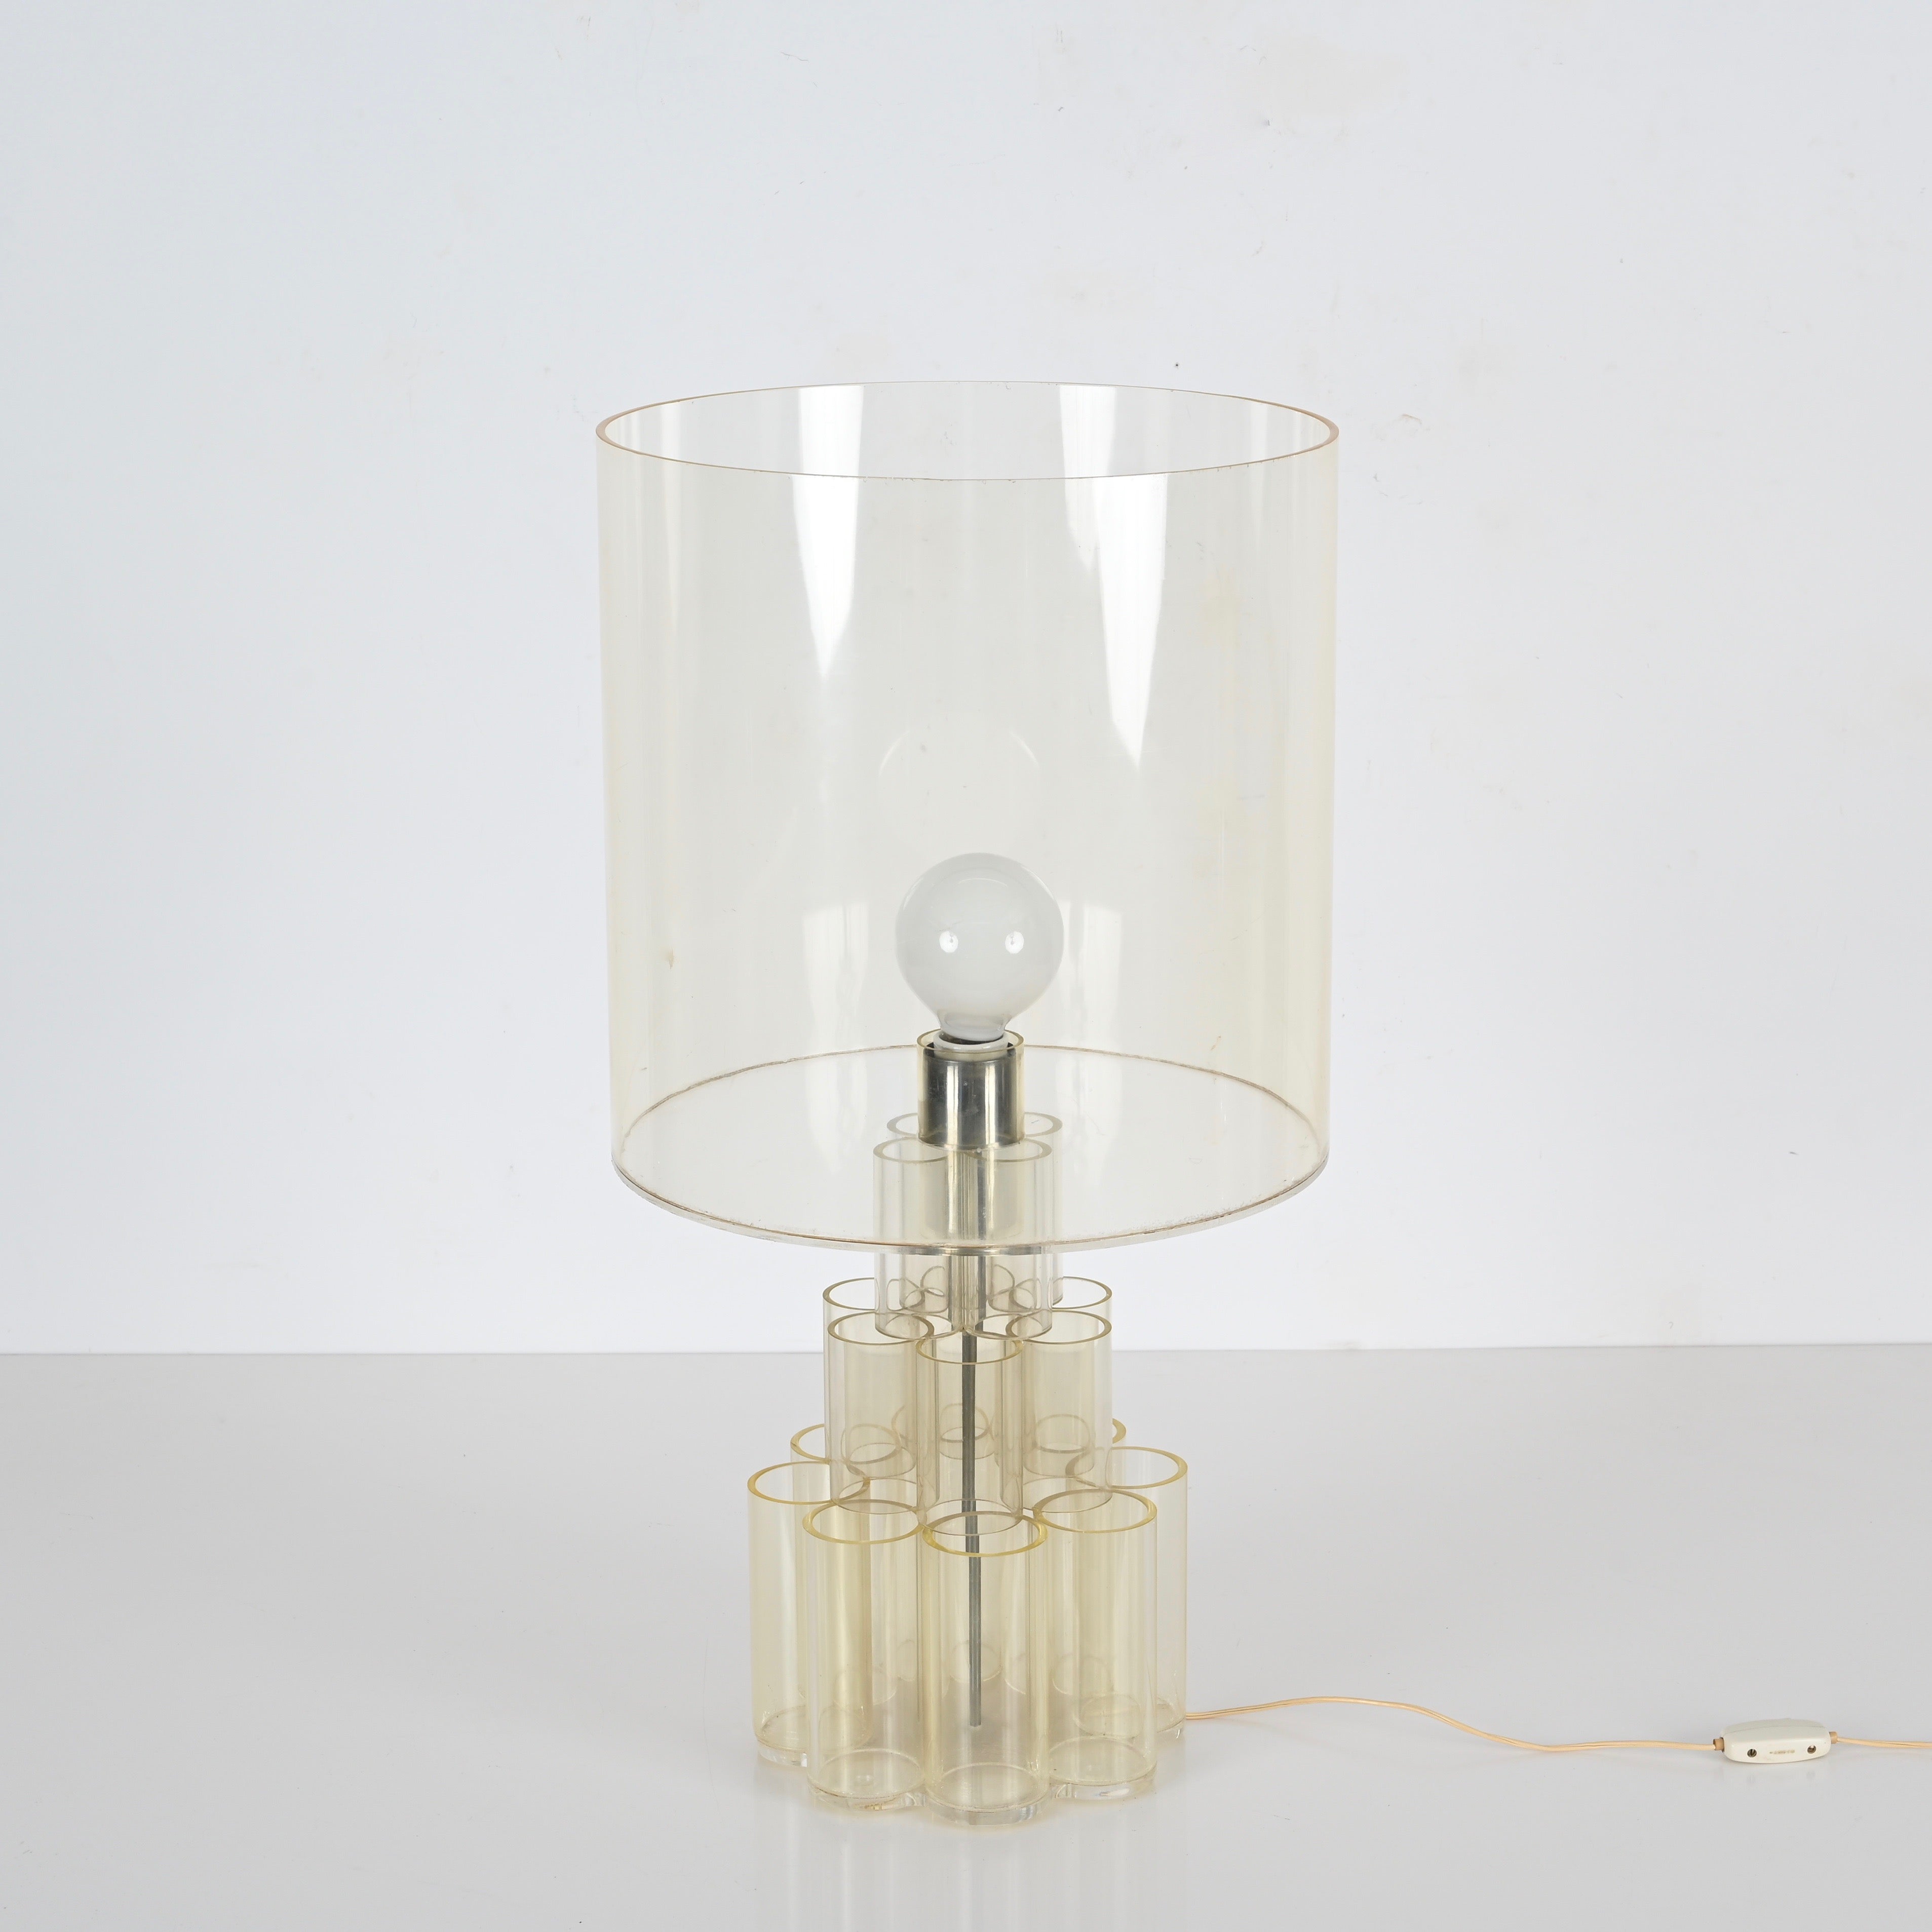 Mid-Century Modern Table Lamp in Lucite Plexiglass, Panton Style, Italy, 1970s For Sale 3